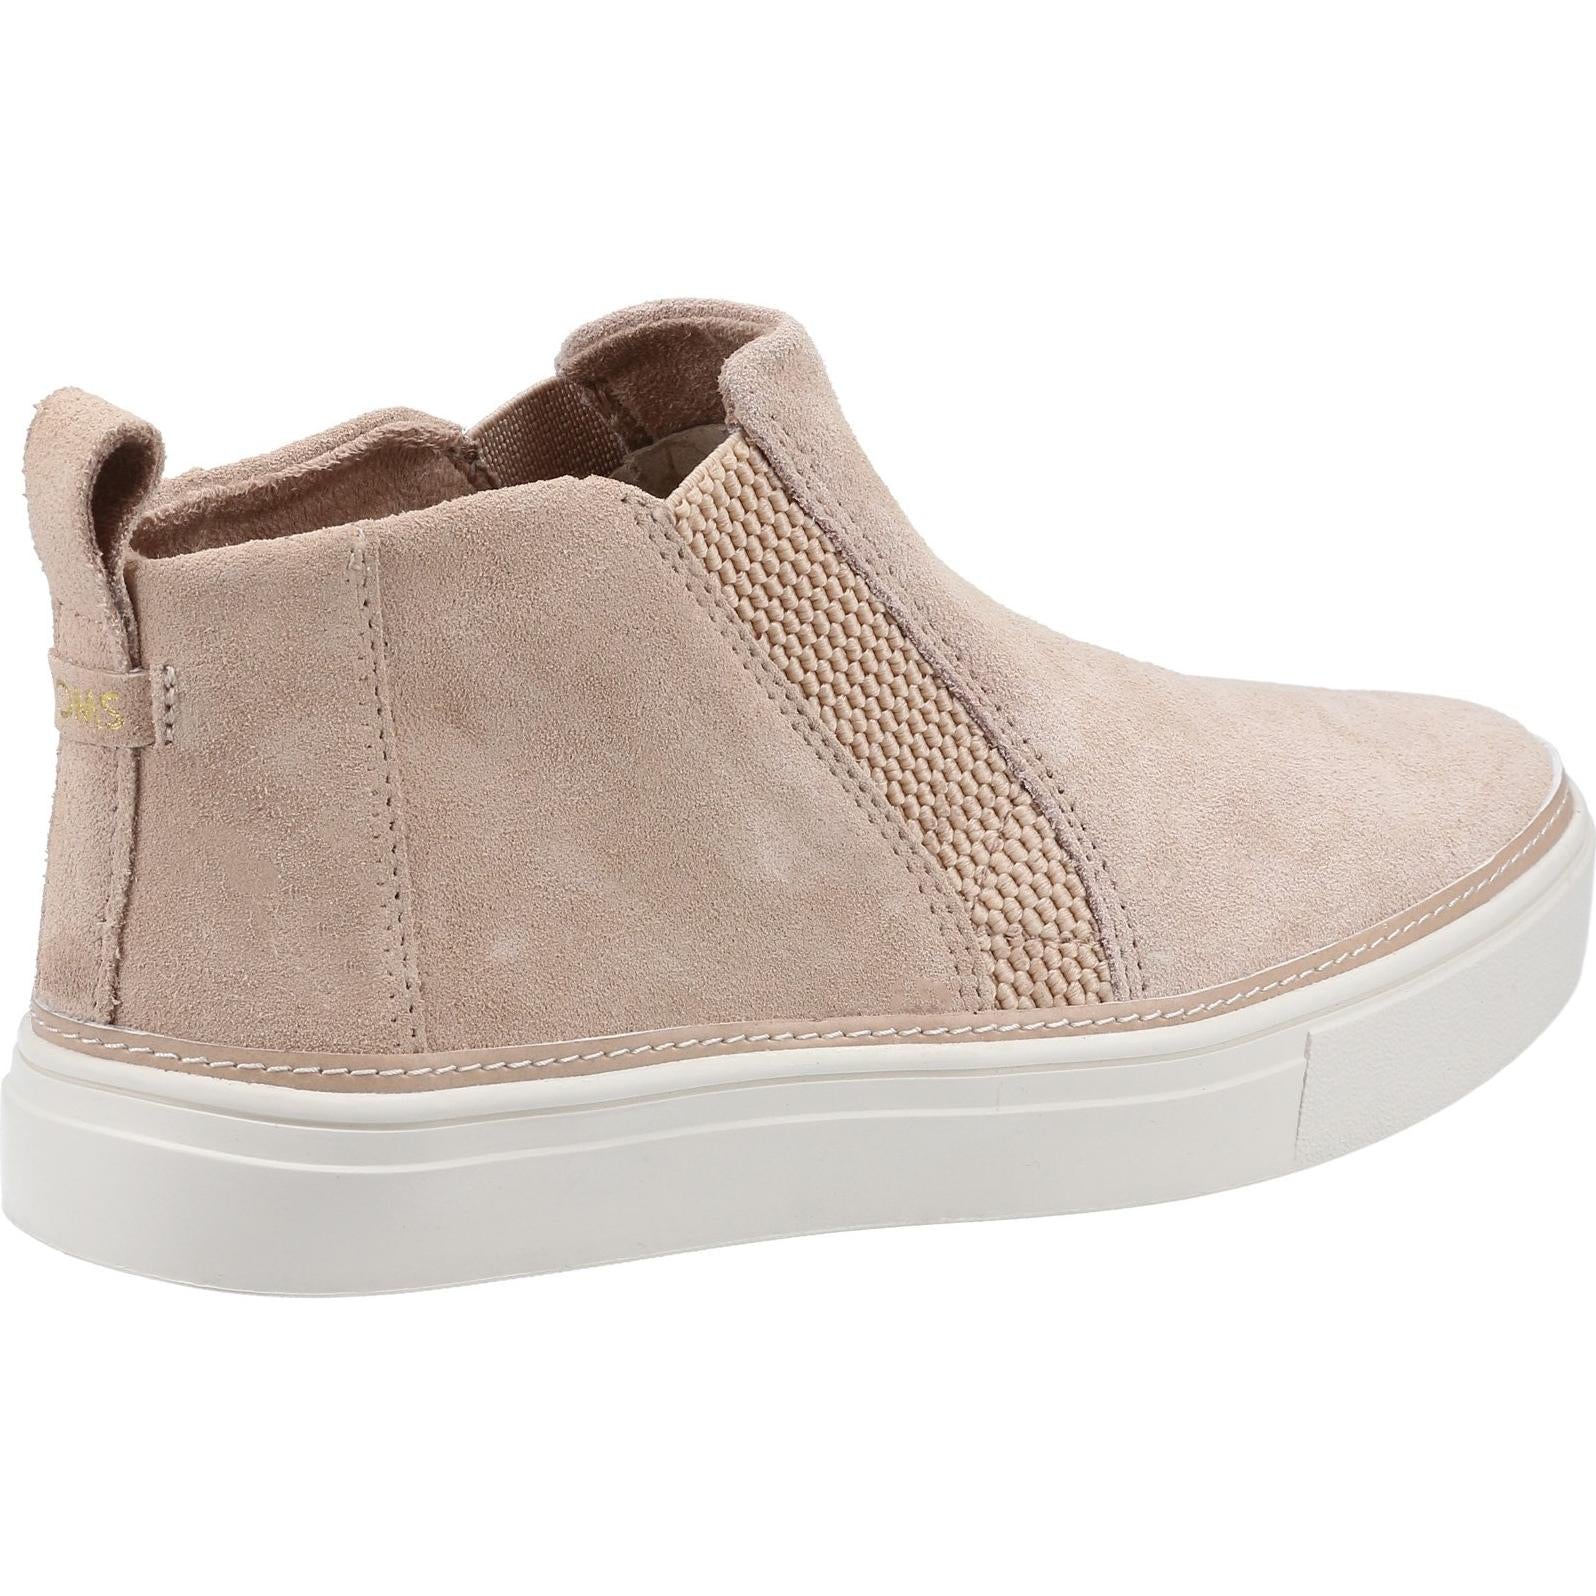 Toms Bryce Ankle Boots